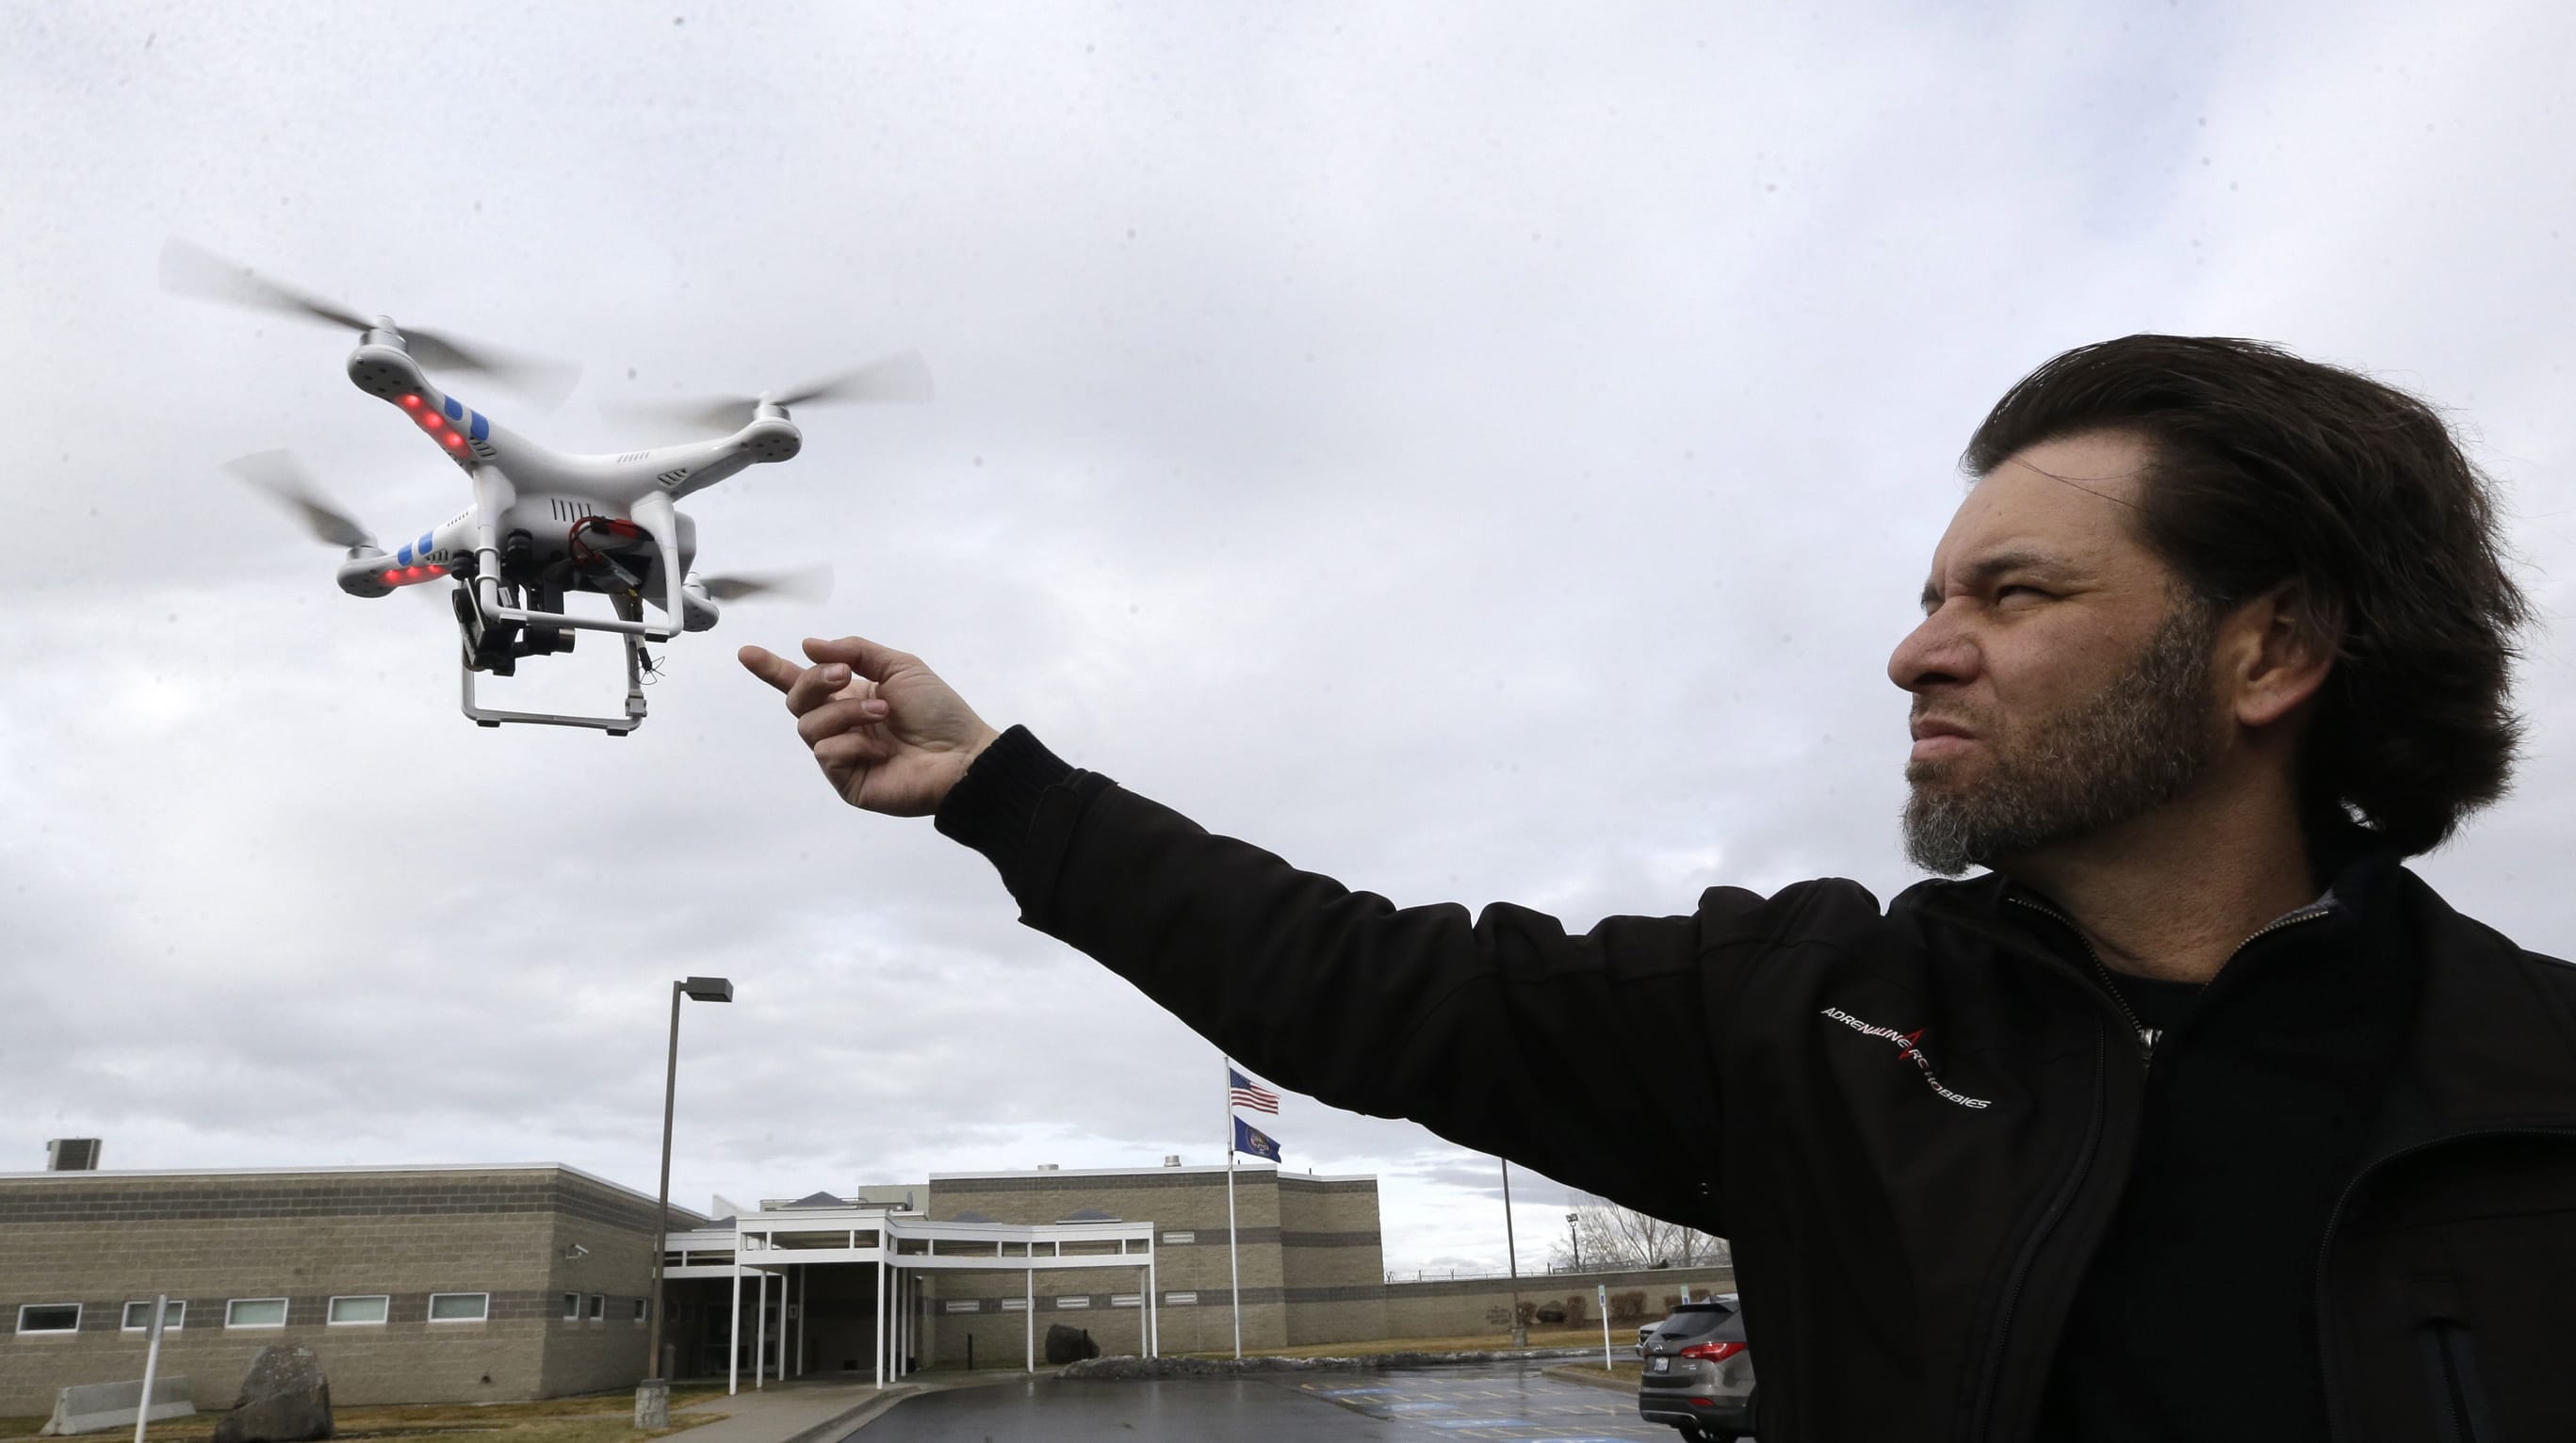 Jon McBride, who designs and builds drones with Digital Defense Surveillance, flies a training drone for members of the the Box Elder County Sheriff's Office search and rescue team during a February demonstration in Utah. The Obama administration is on the verge of proposing long-awaited rules for commercial drone operations in U.S.